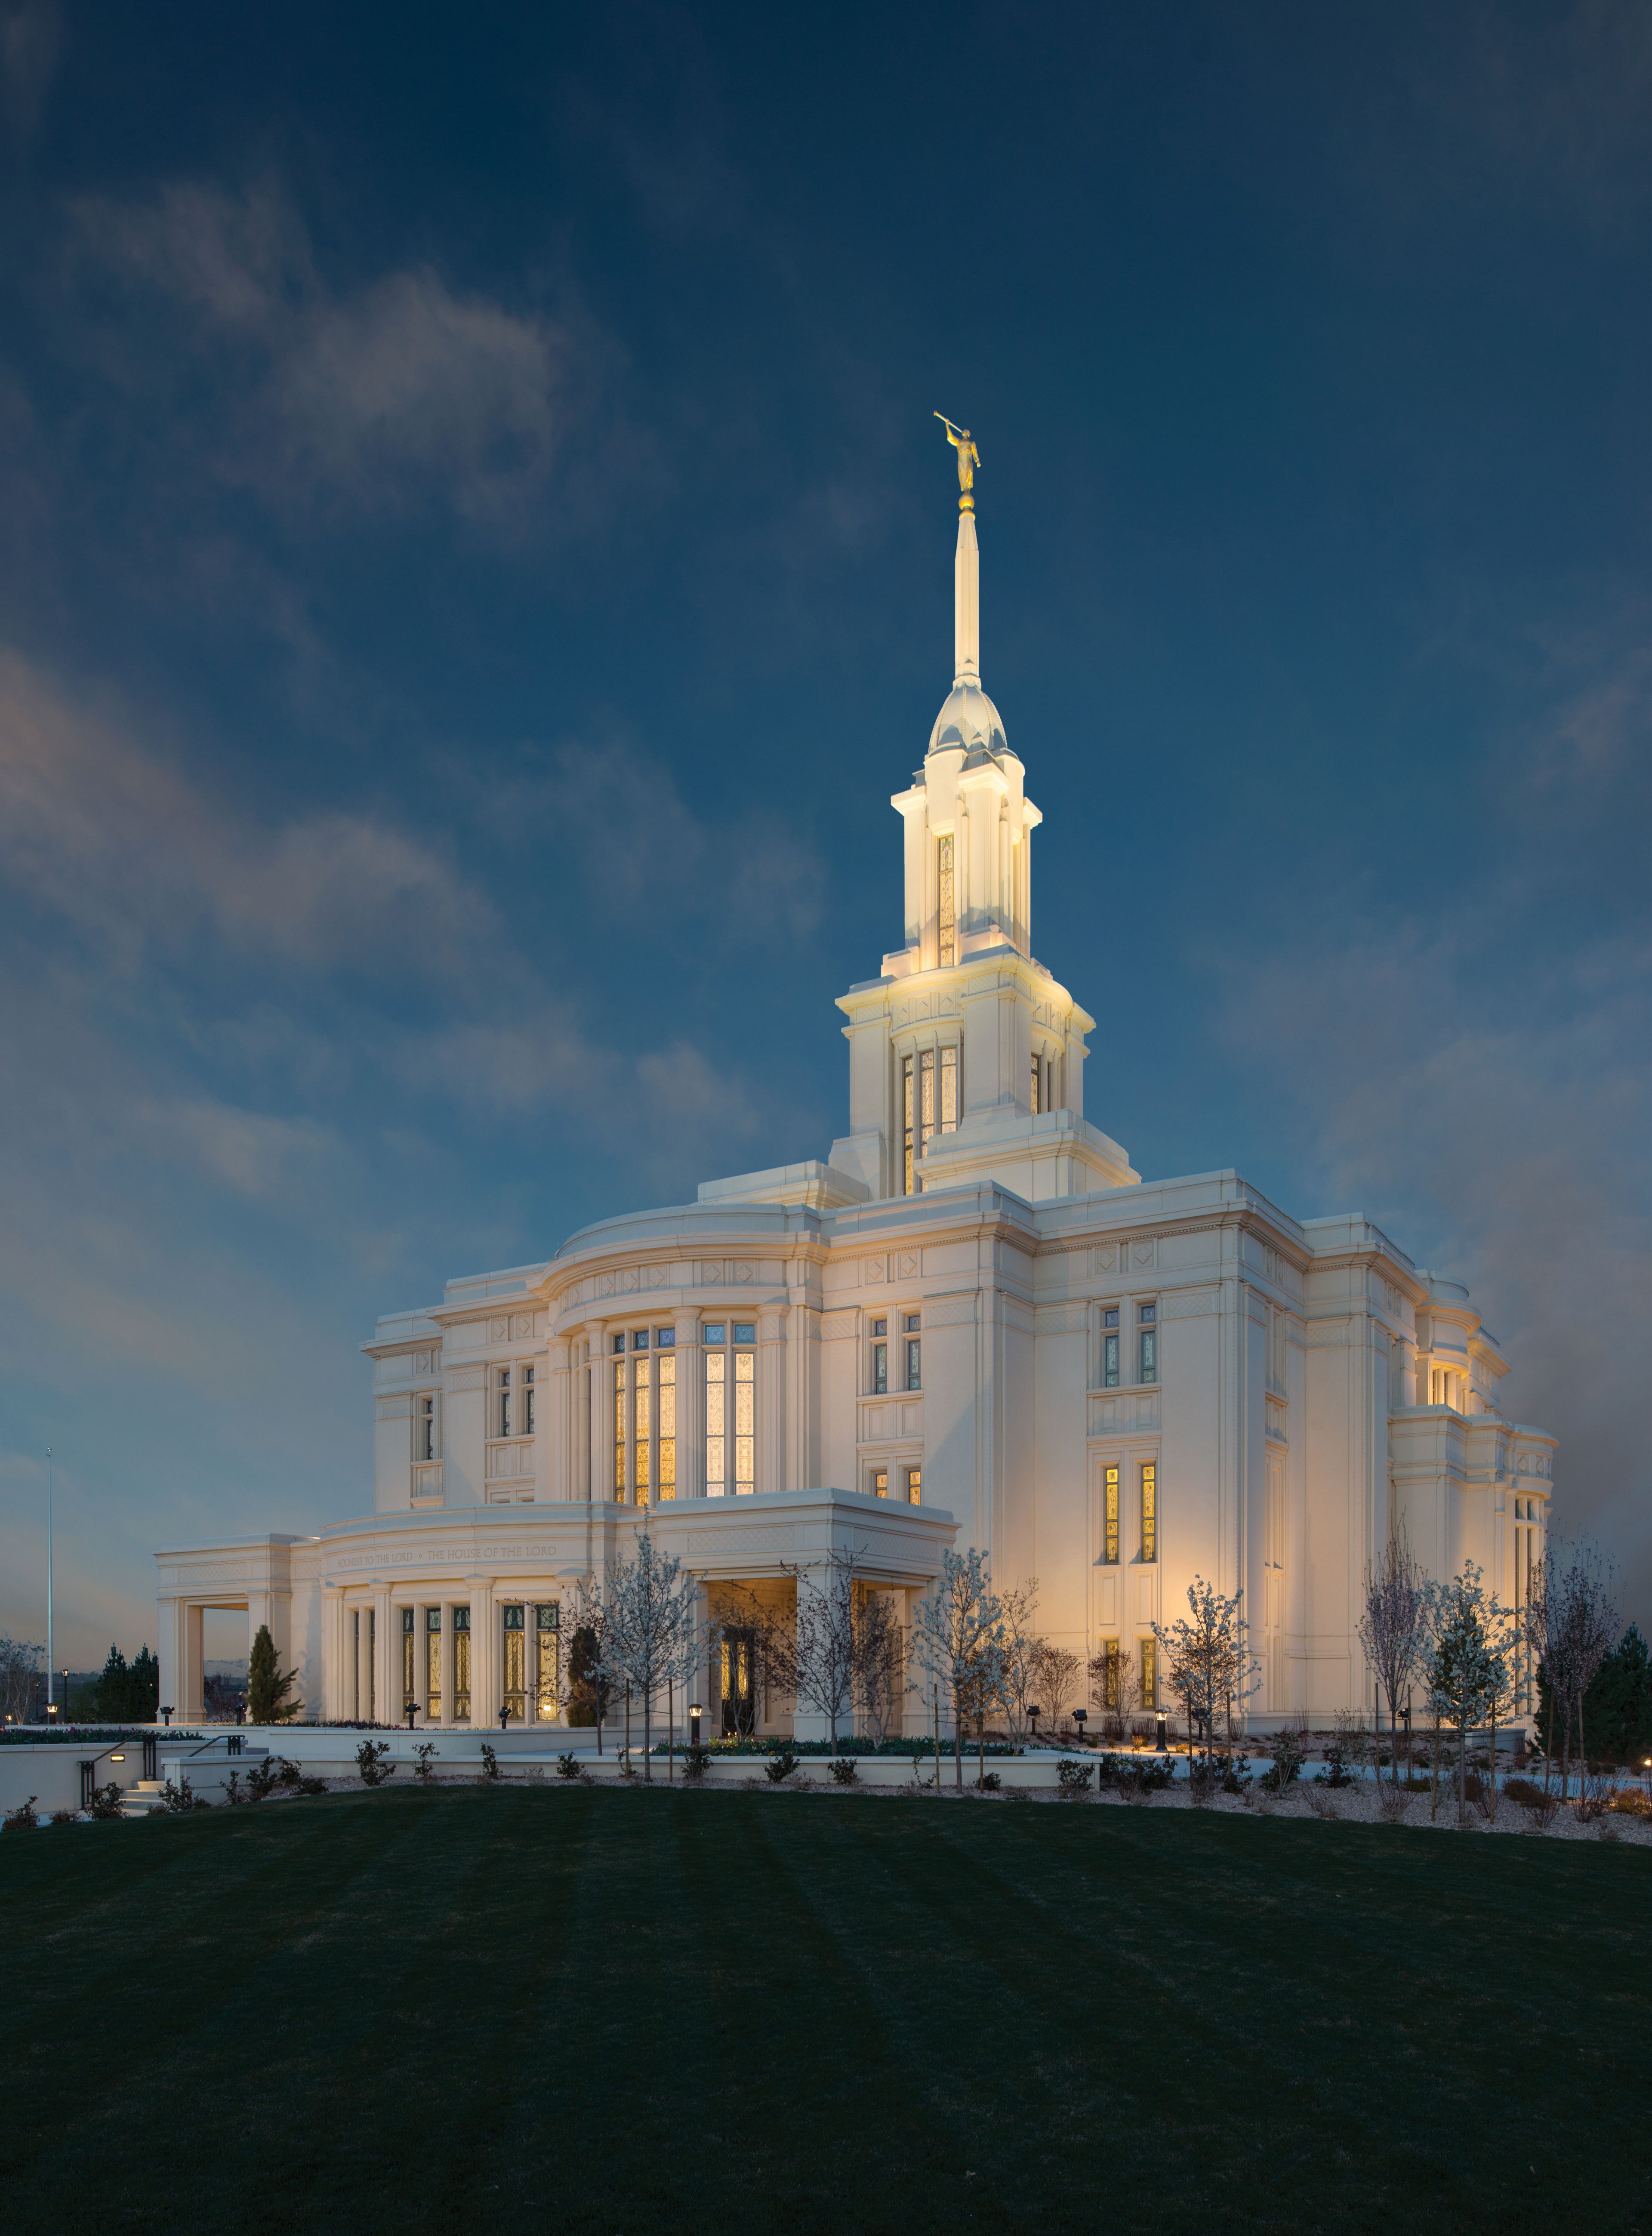 A view of the entire Payson Utah Temple in the evening.